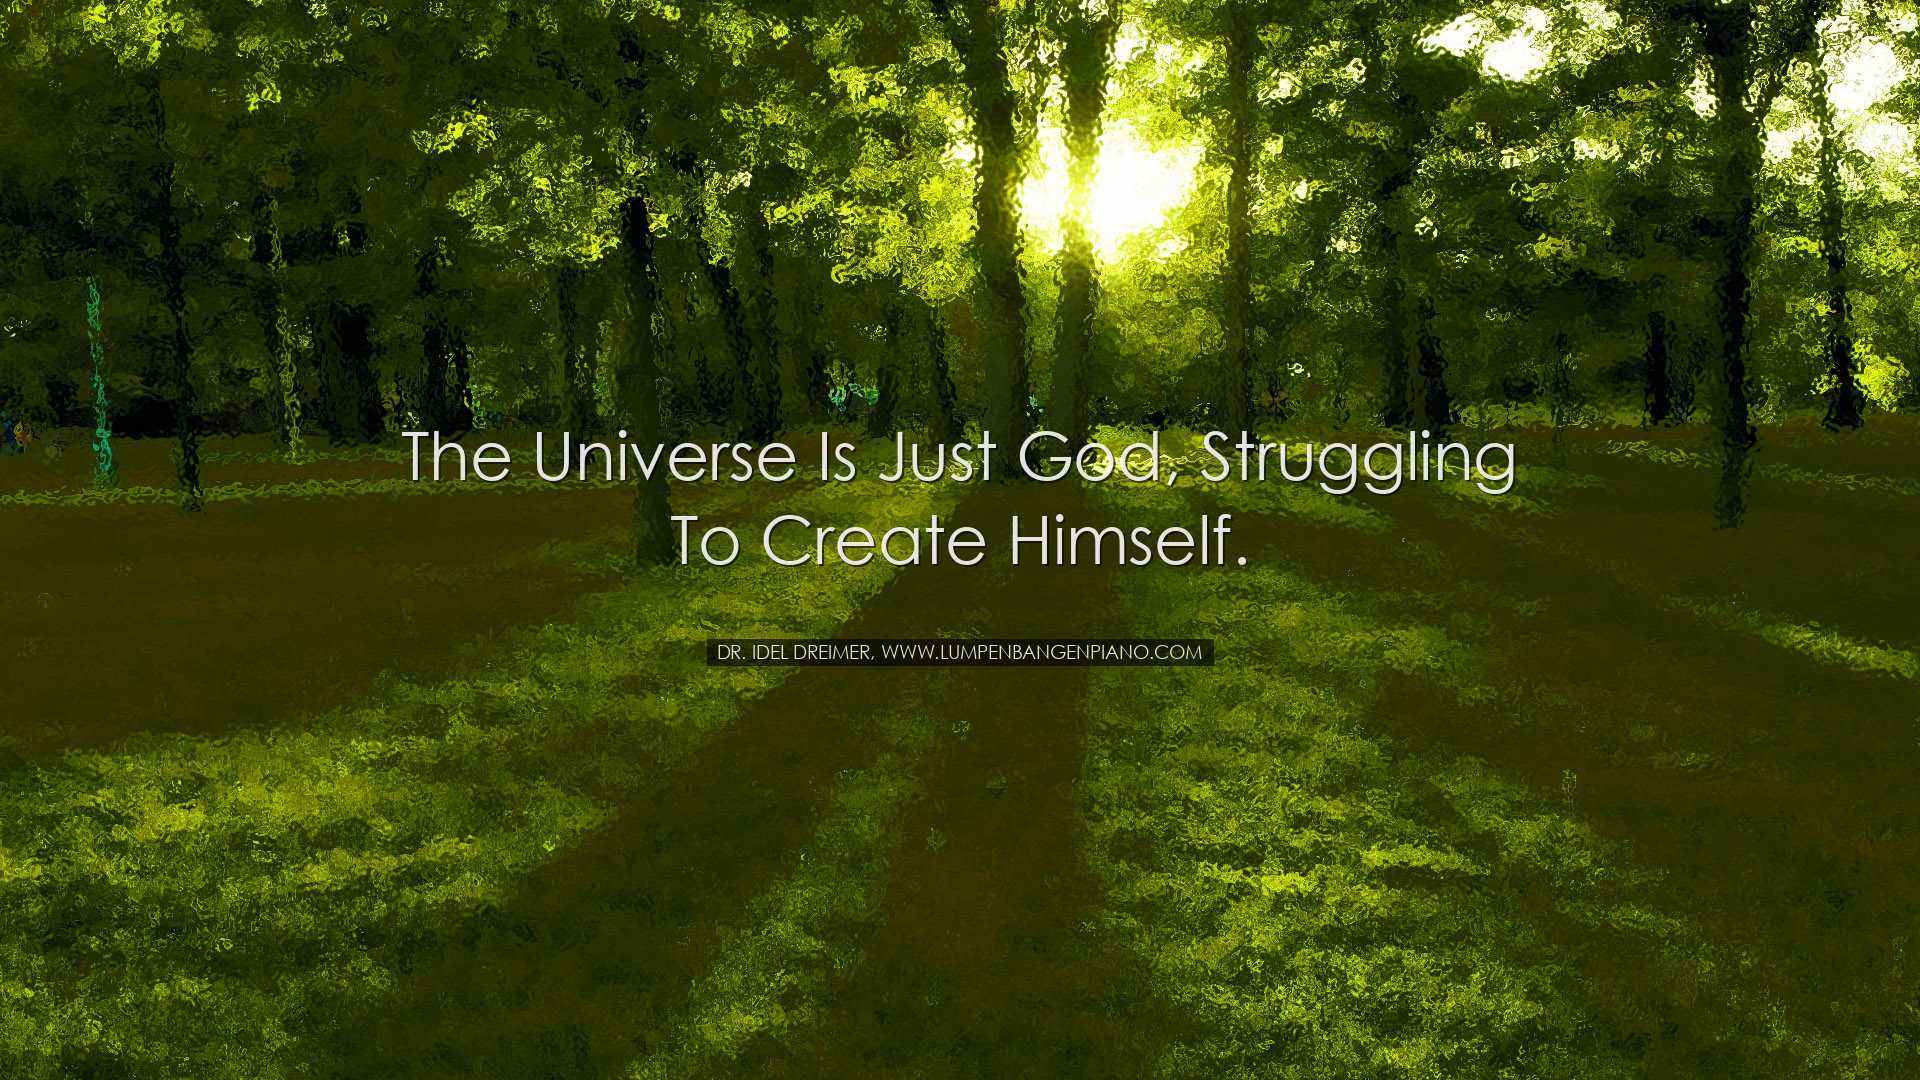 The universe is just God, struggling to create Himself. - Dr. Idel